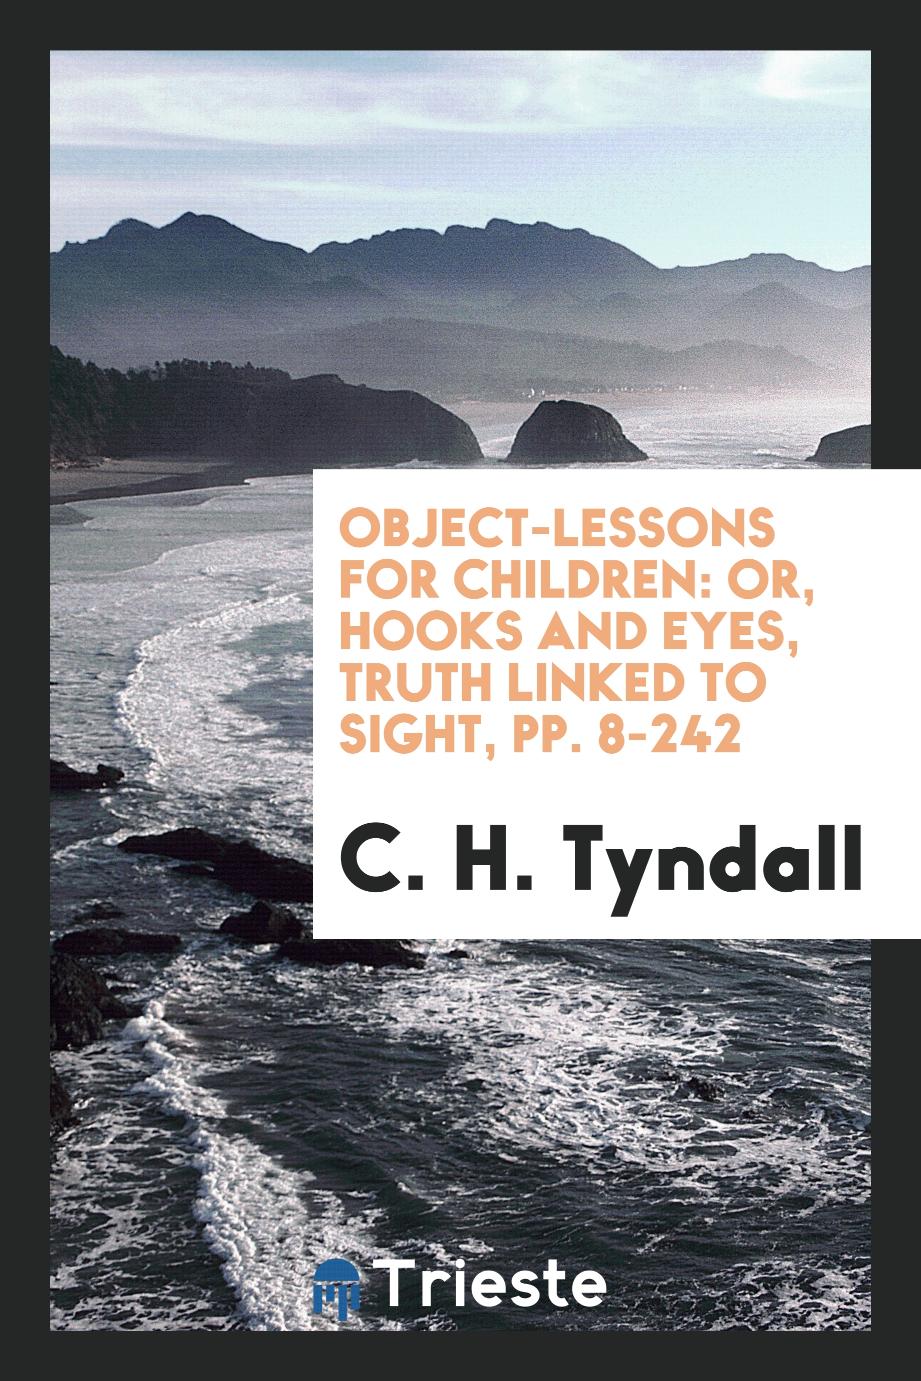 Object-Lessons for Children: Or, Hooks and Eyes, Truth Linked to Sight, pp. 8-242